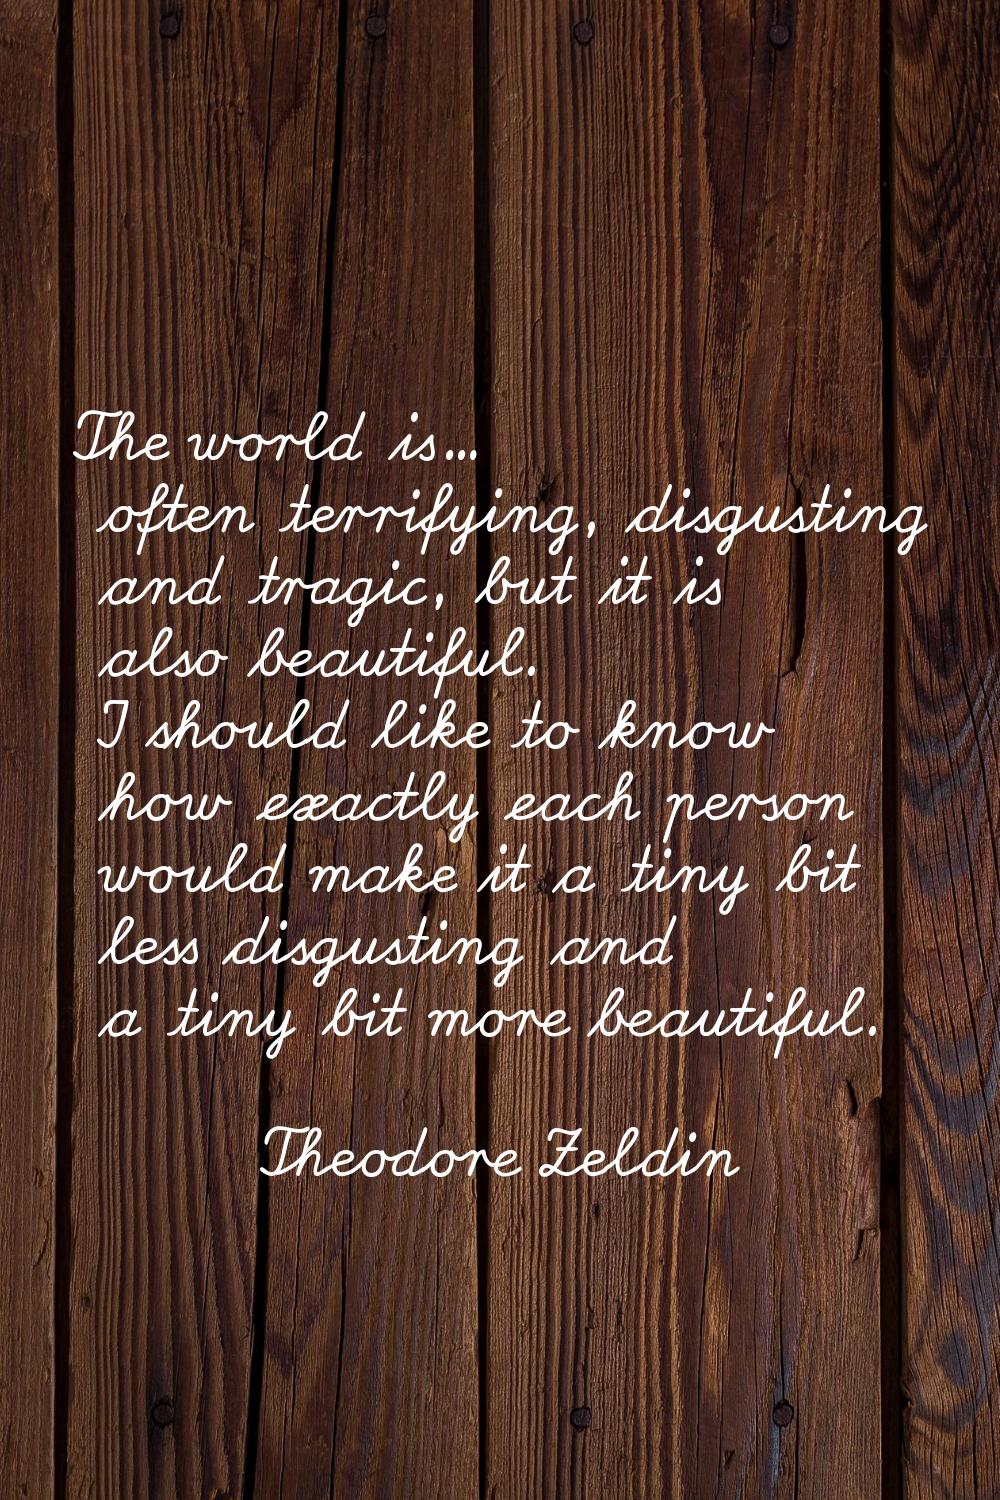 The world is... often terrifying, disgusting and tragic, but it is also beautiful. I should like to